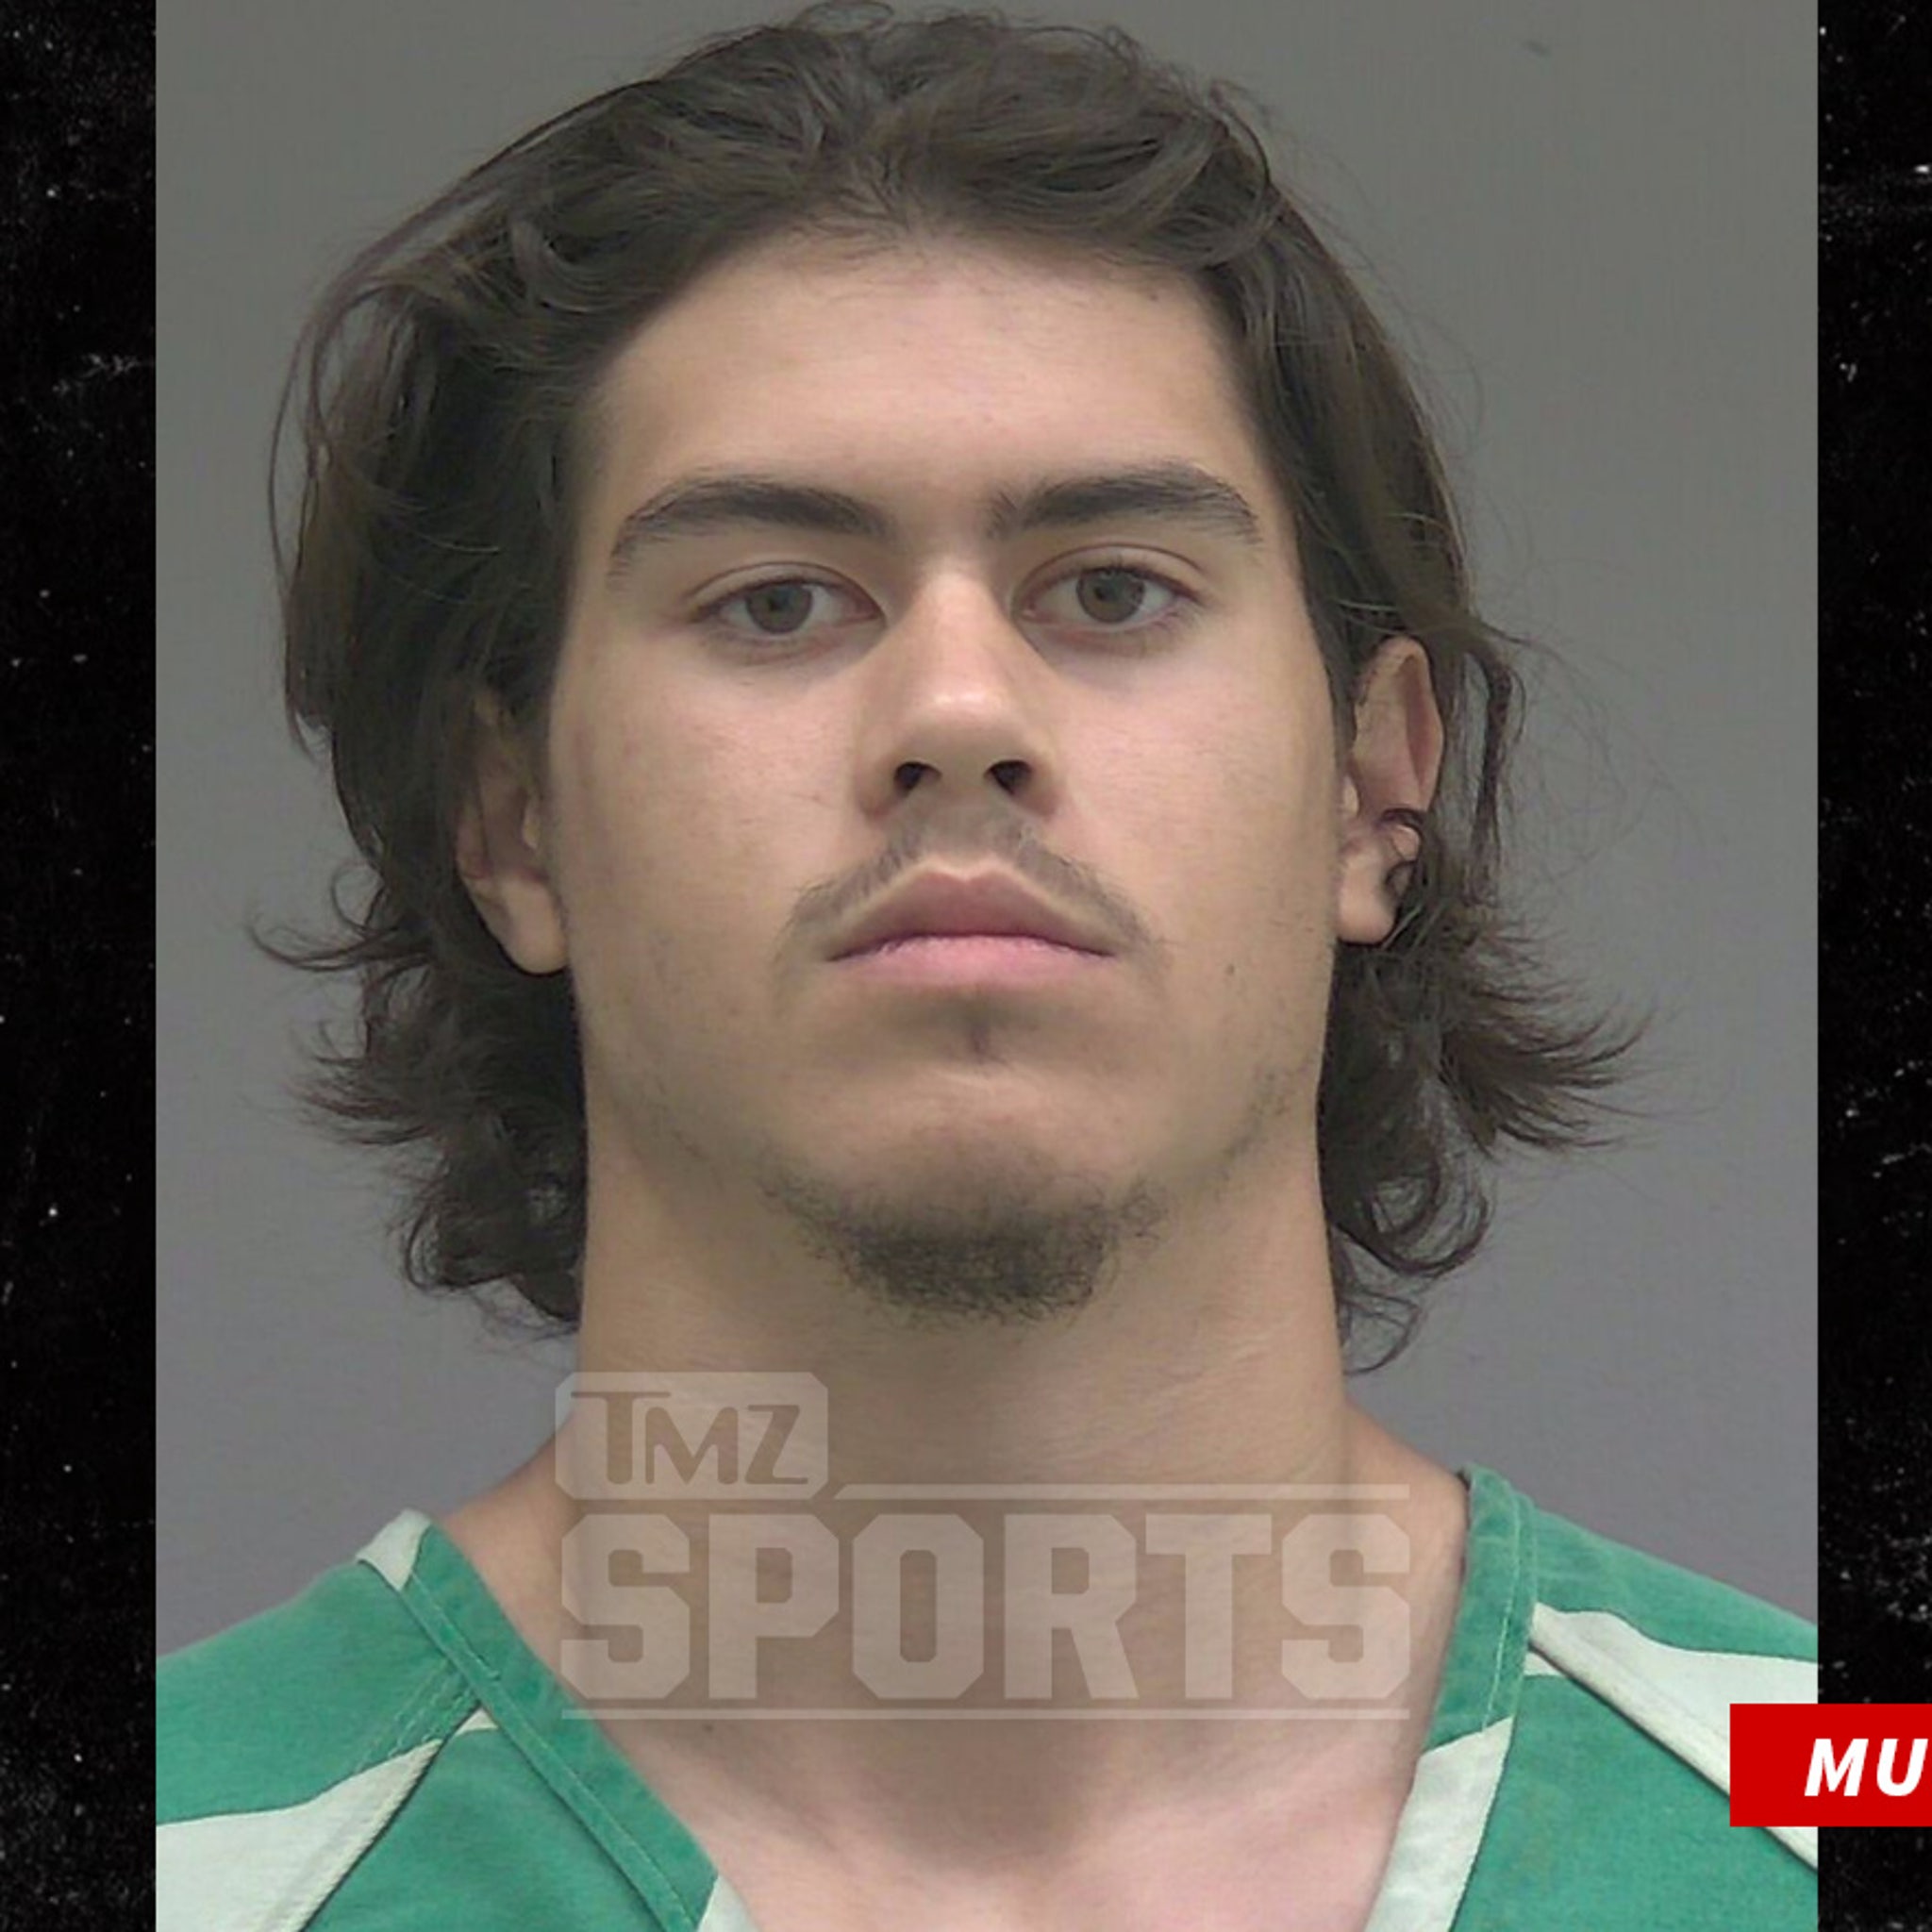 UF QB Jalen Kitna Shared Image Of Adult Male Having Sex With Child, Cops